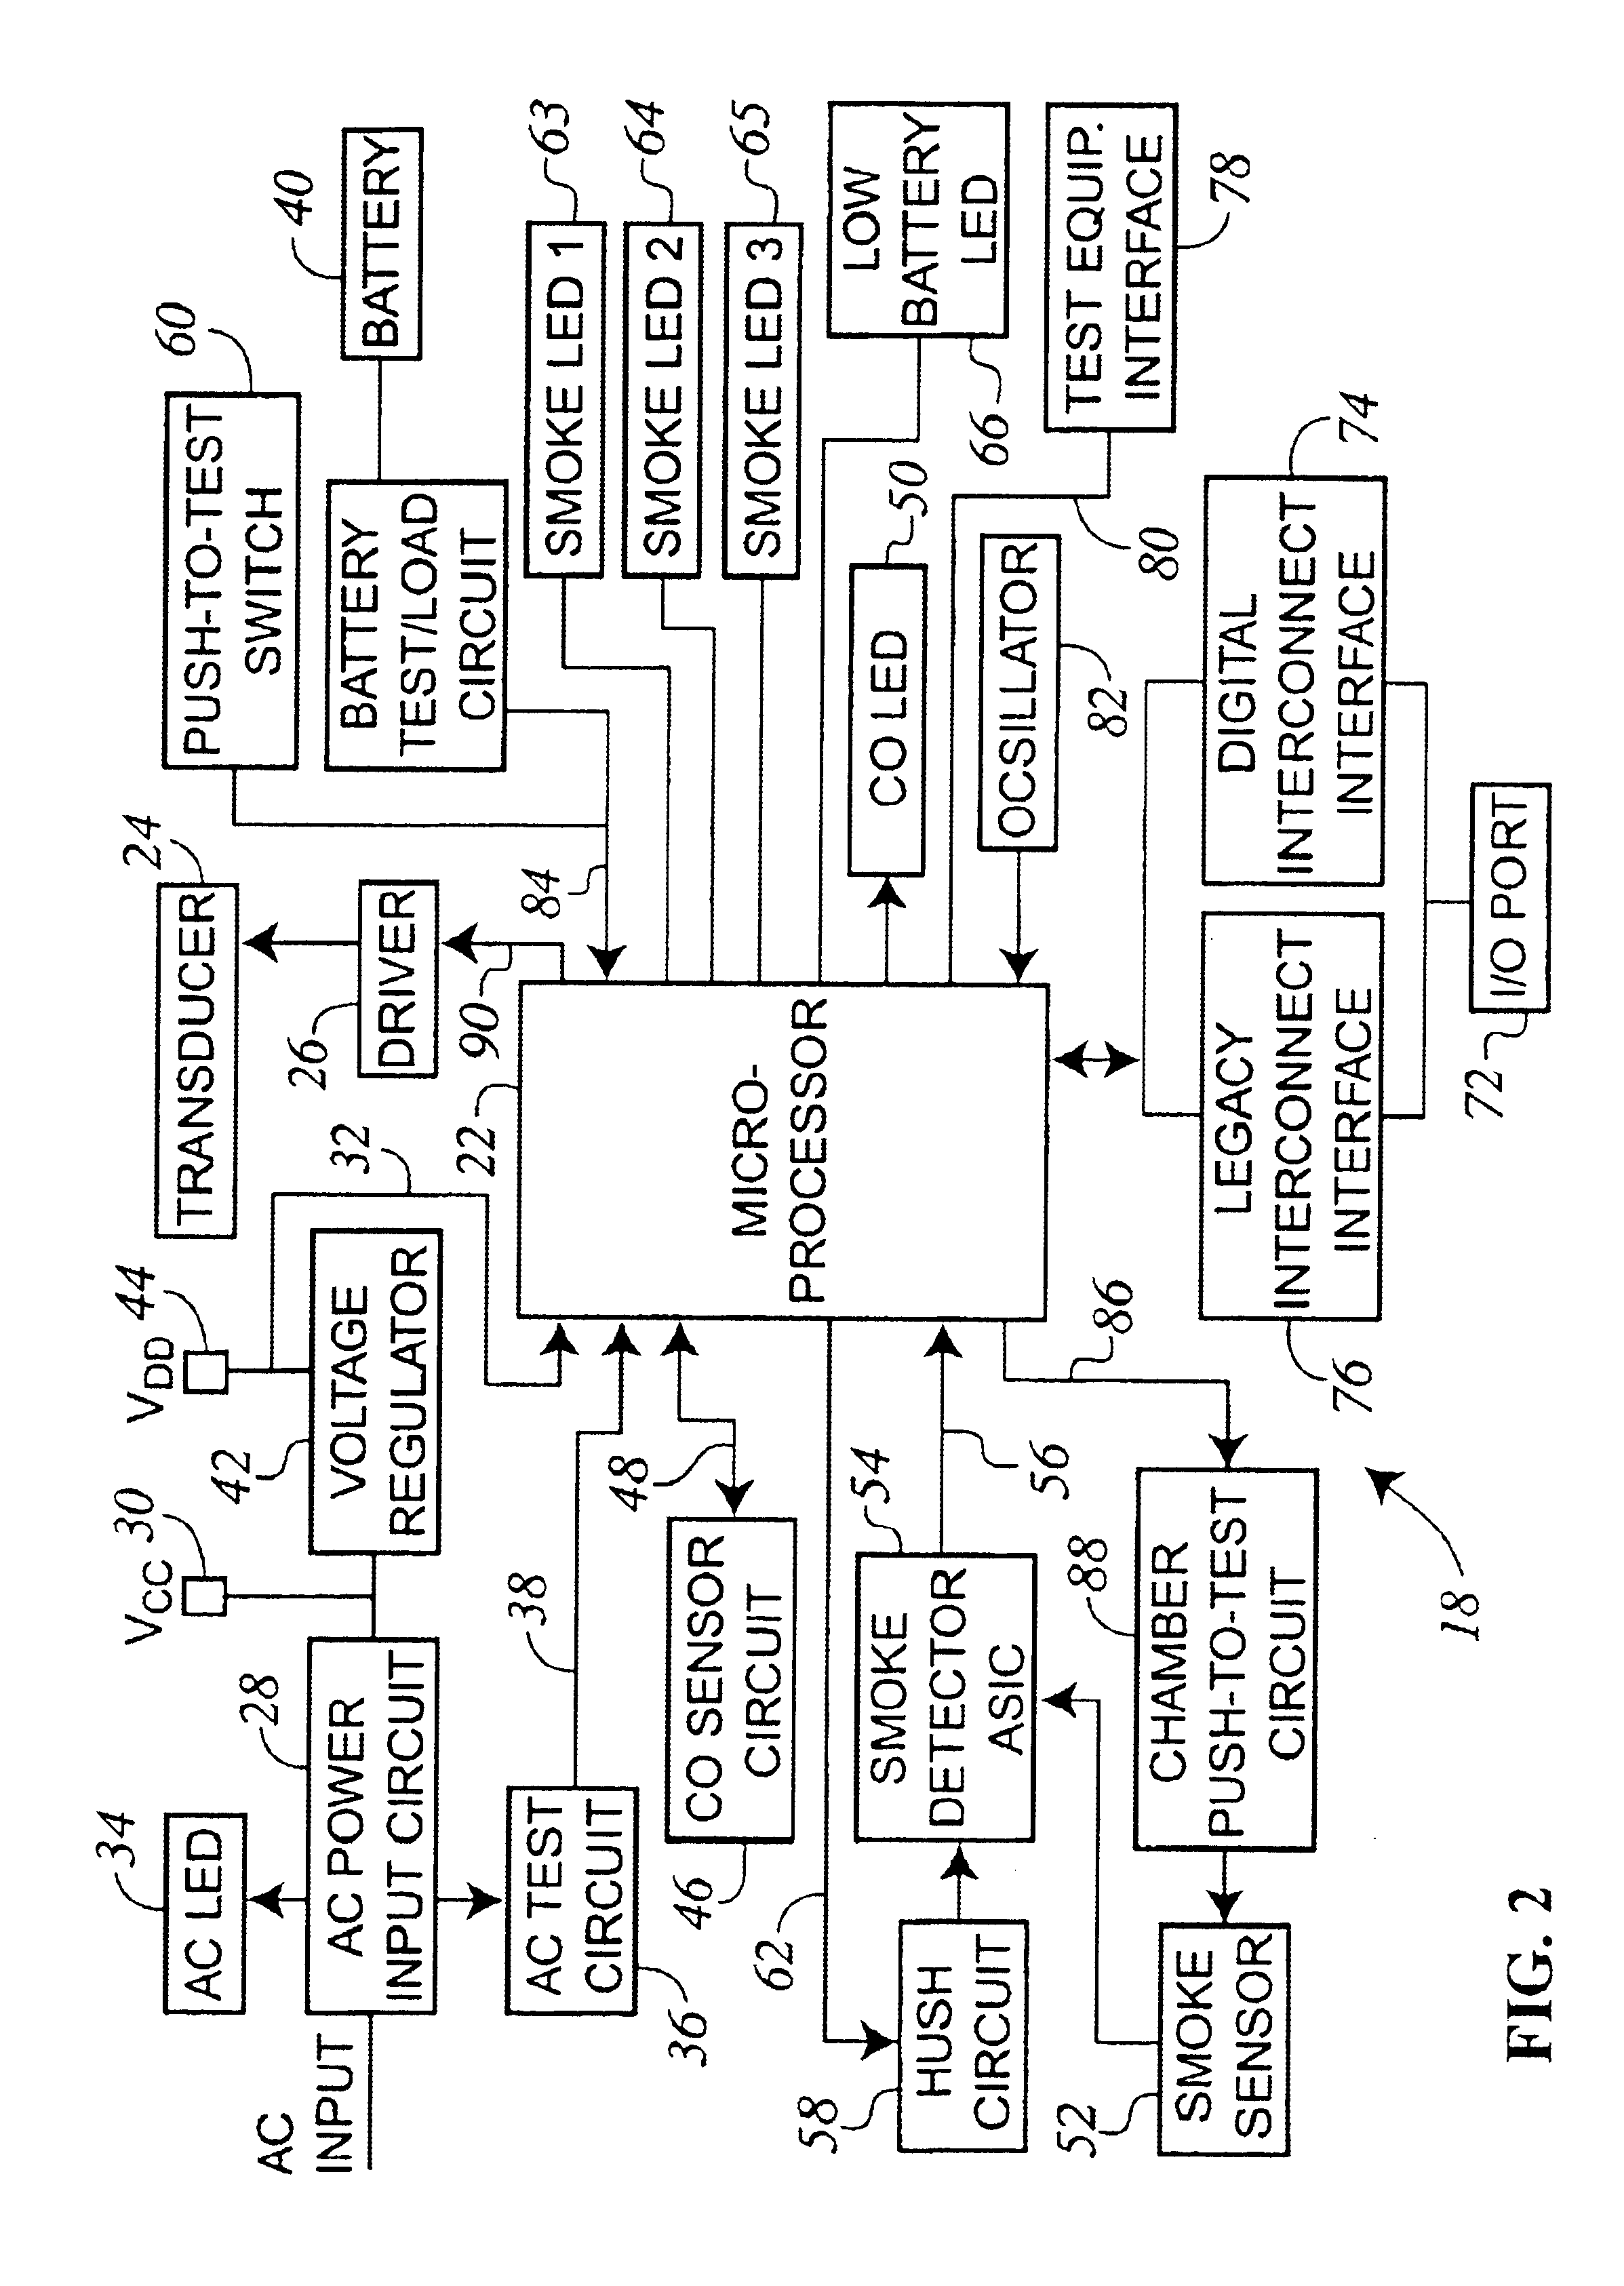 Enhanced visual signaling for an adverse condition detector